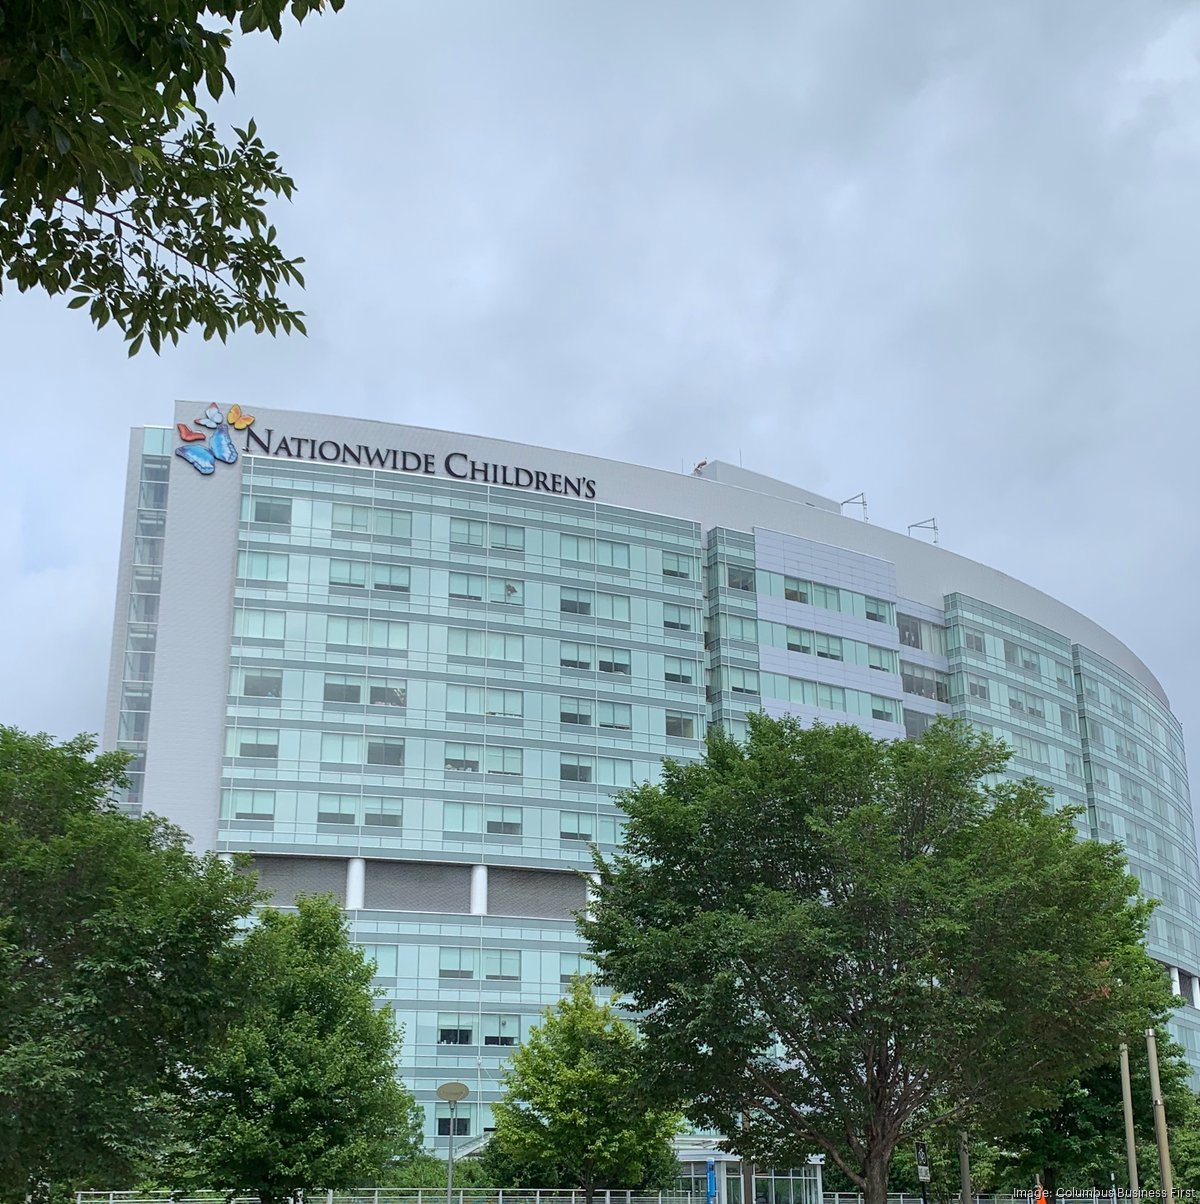 Nationwide Children's Hospital, Nationwide to appear on Columbus